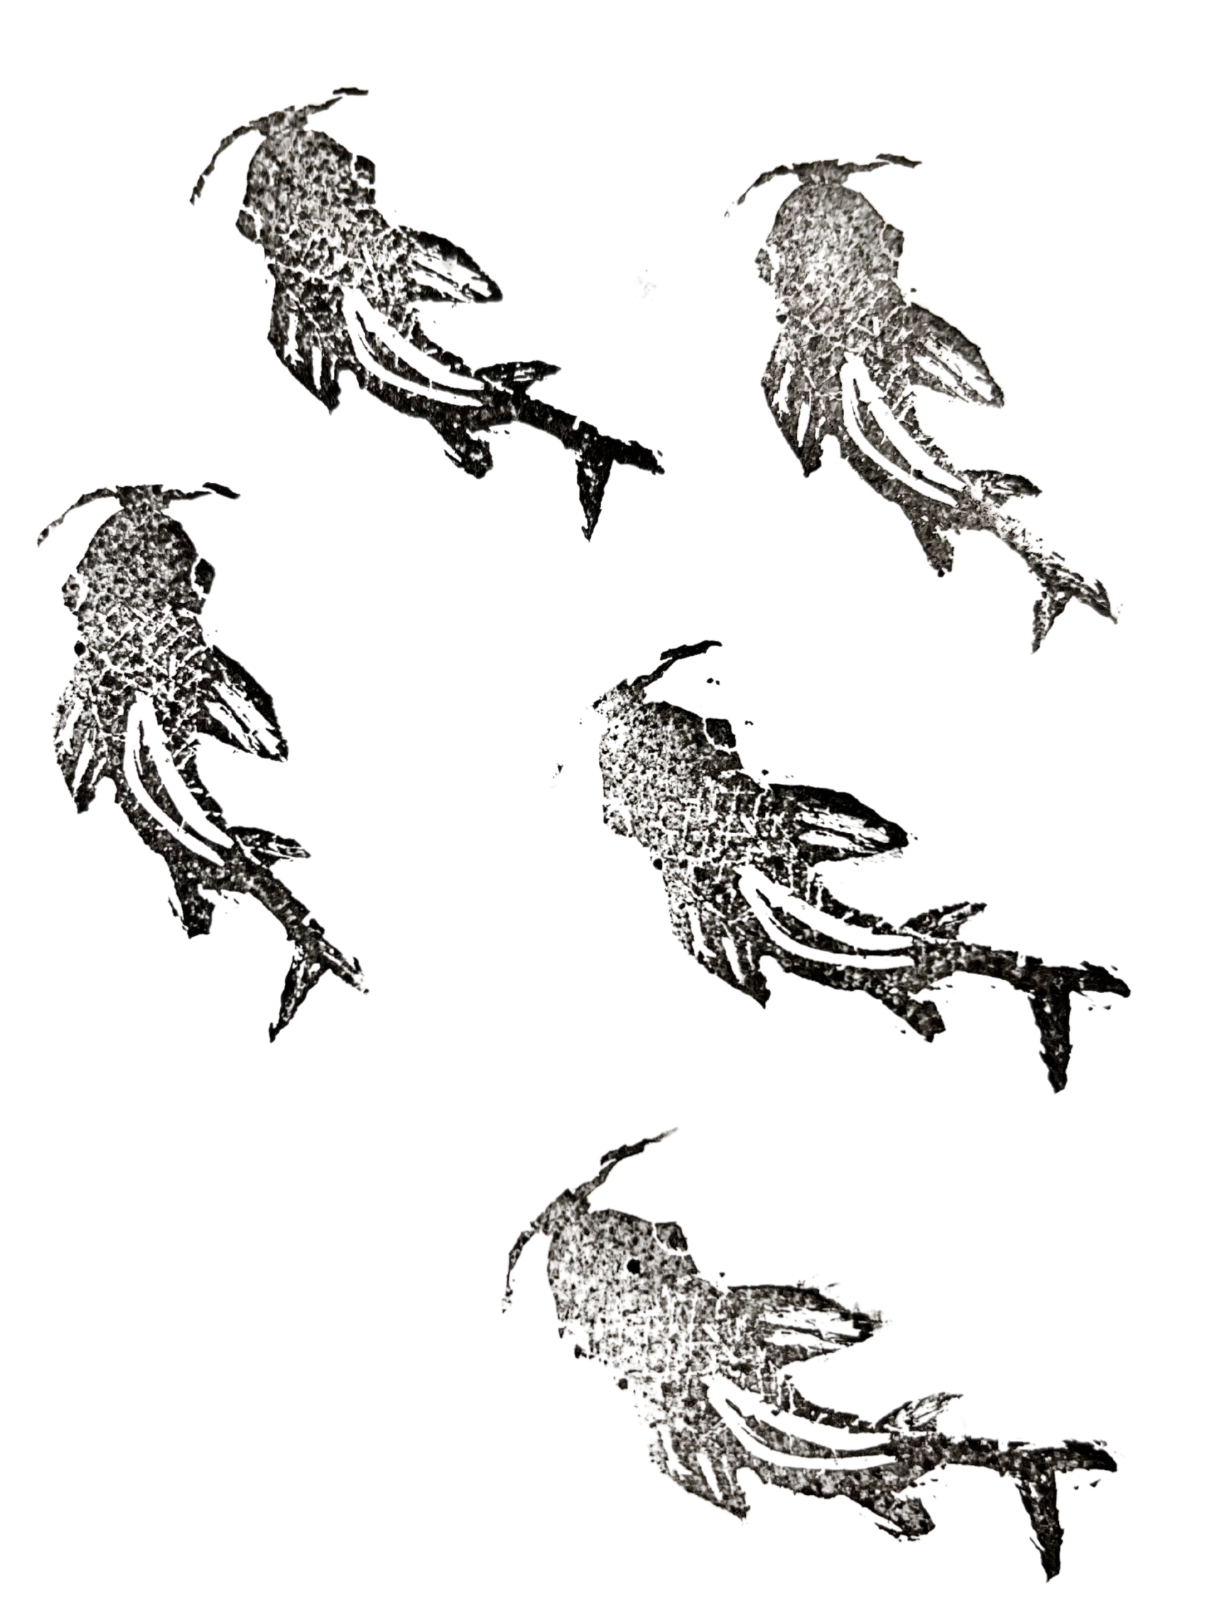 black koi fish images stamped on white paper